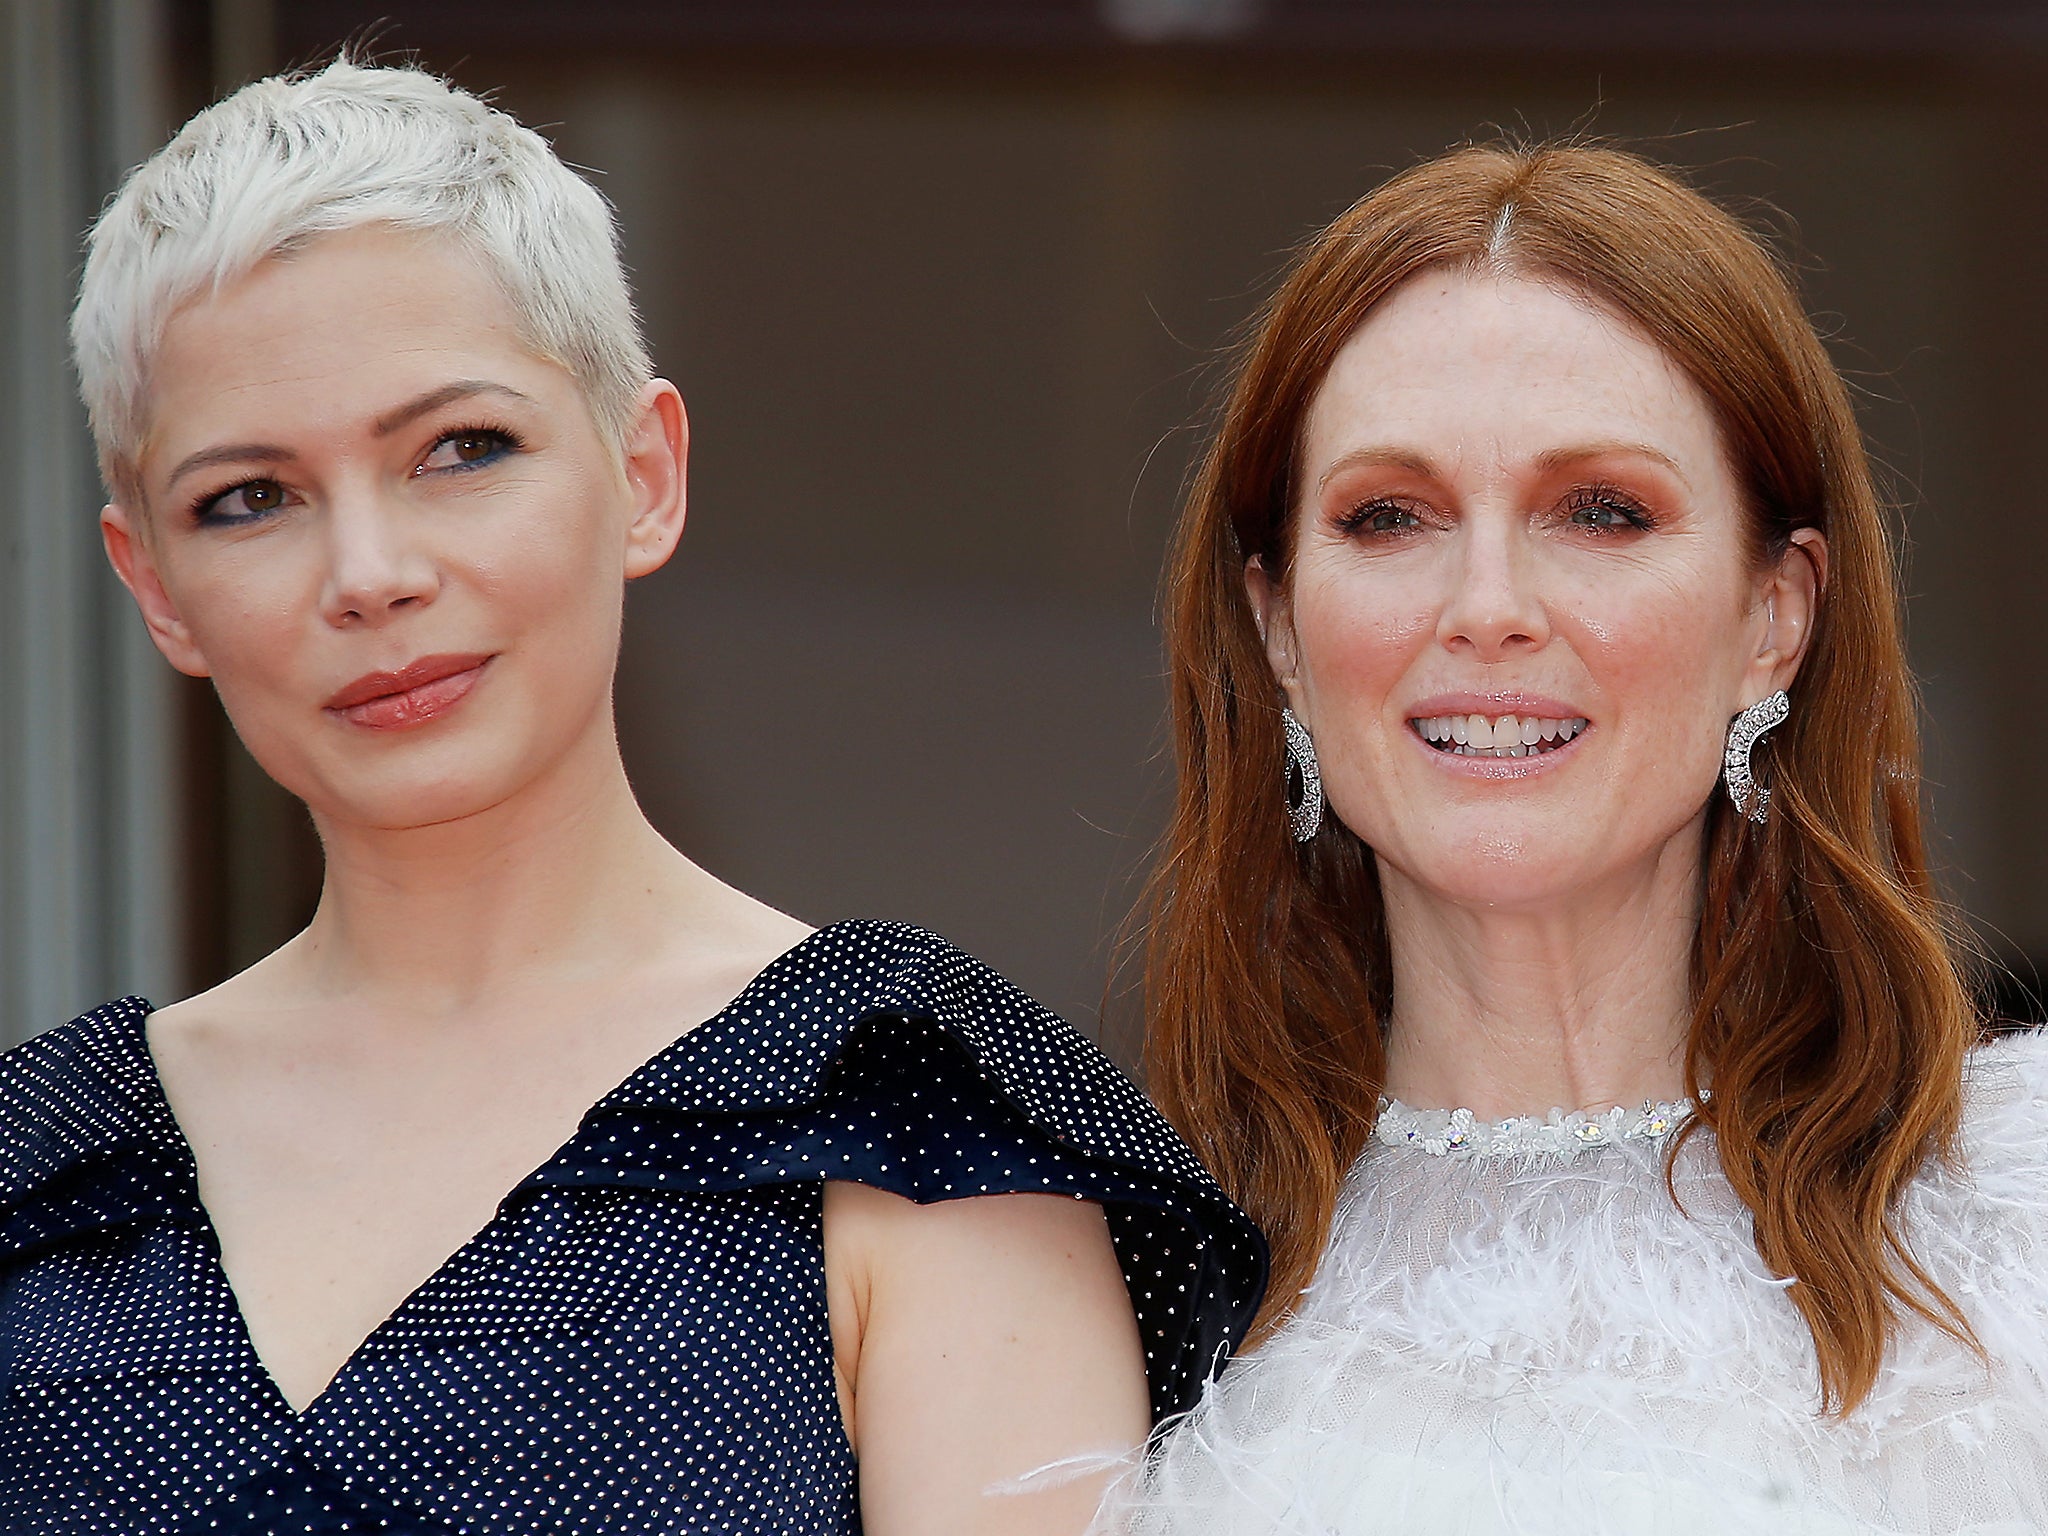 ‘Wonderstruck’ stars Michelle Williams and Julianne Moore at the Cannes premiere on Thursday